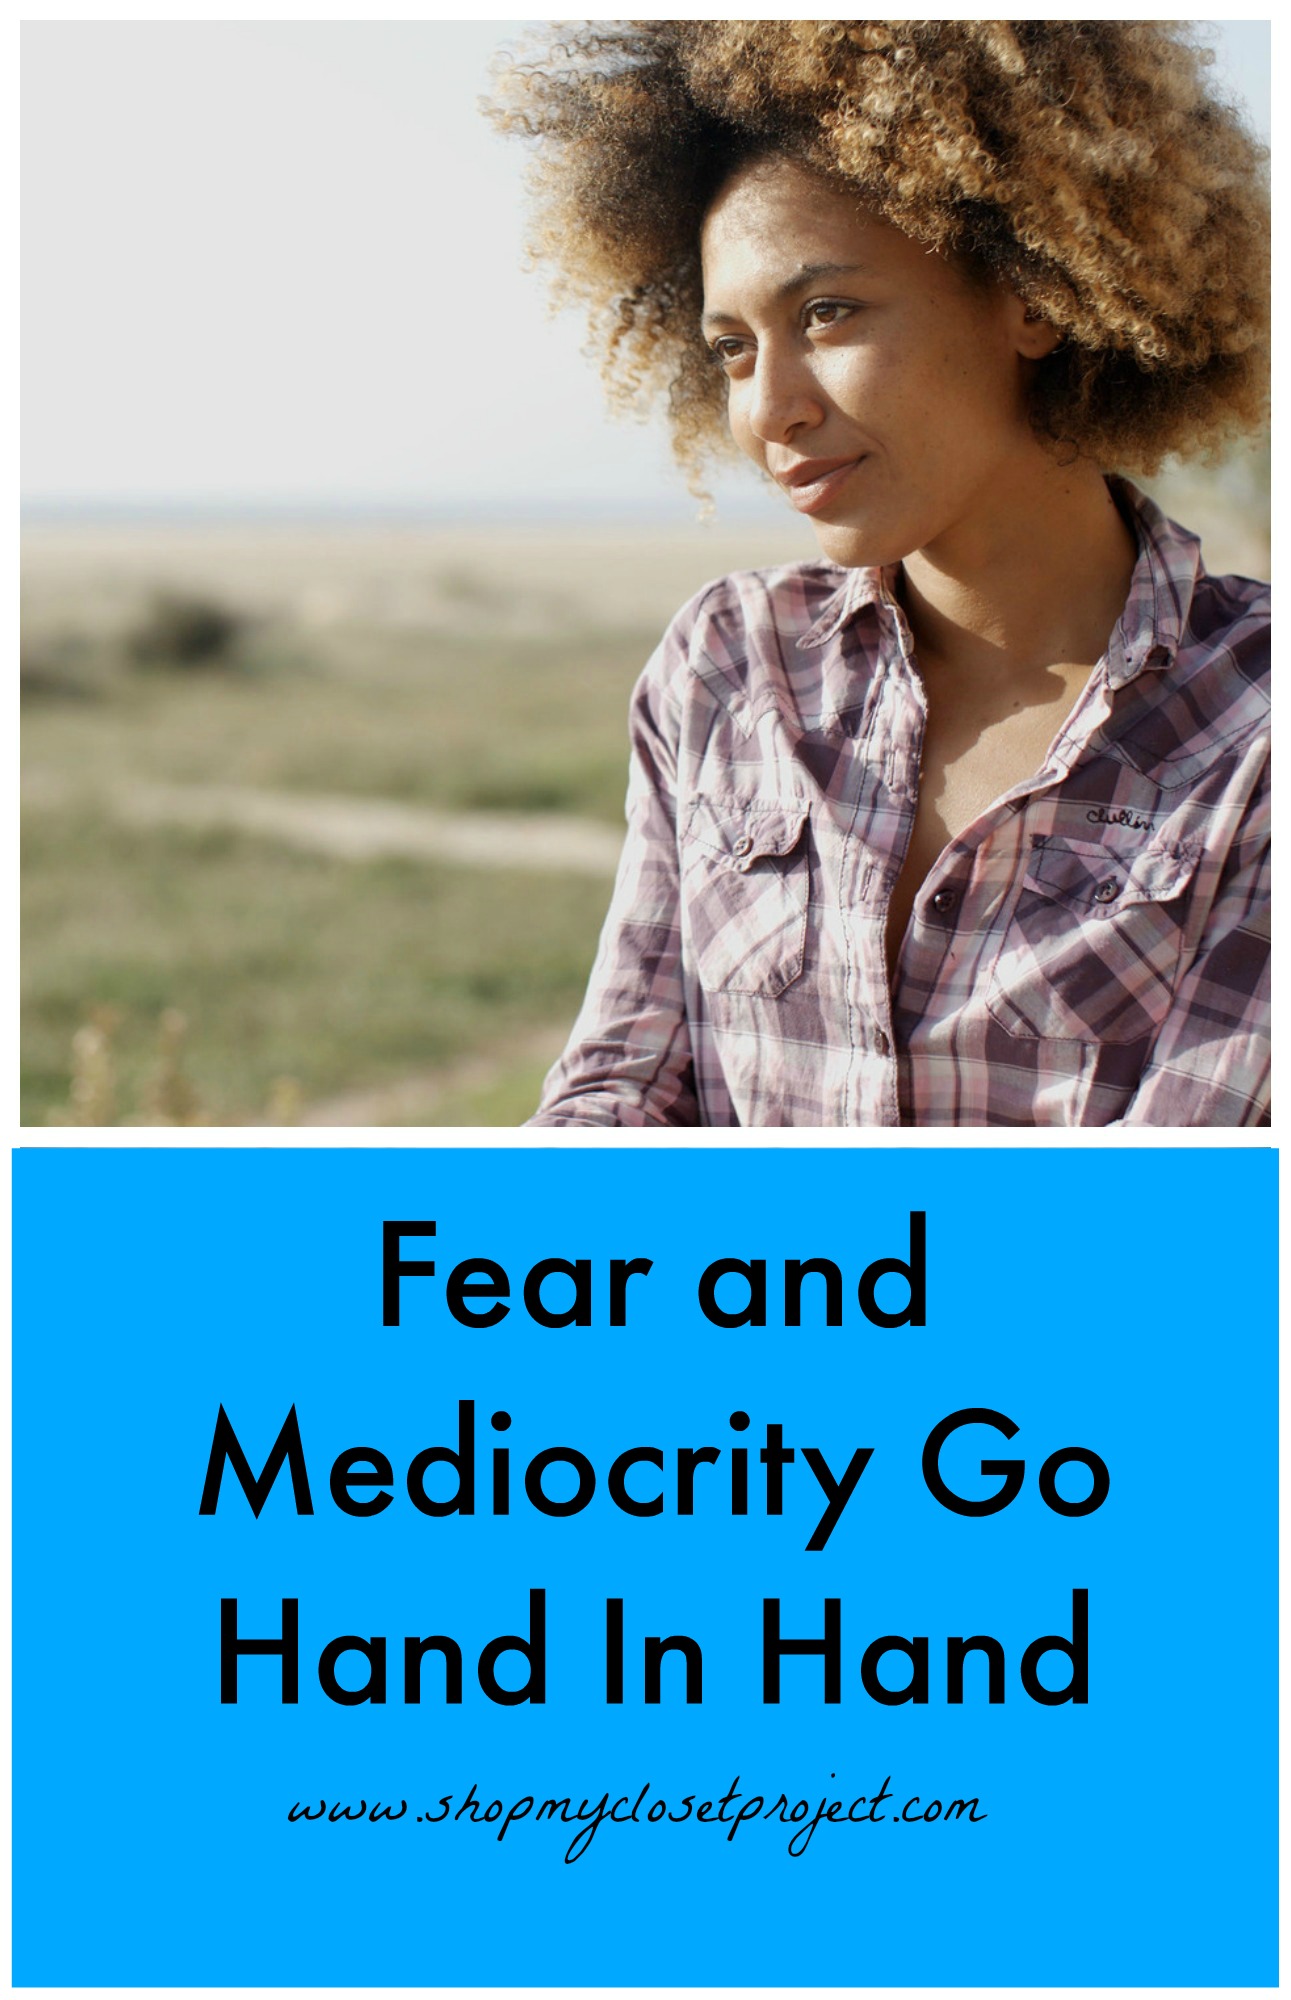 Fear and Mediocrity Go Hand In Hand